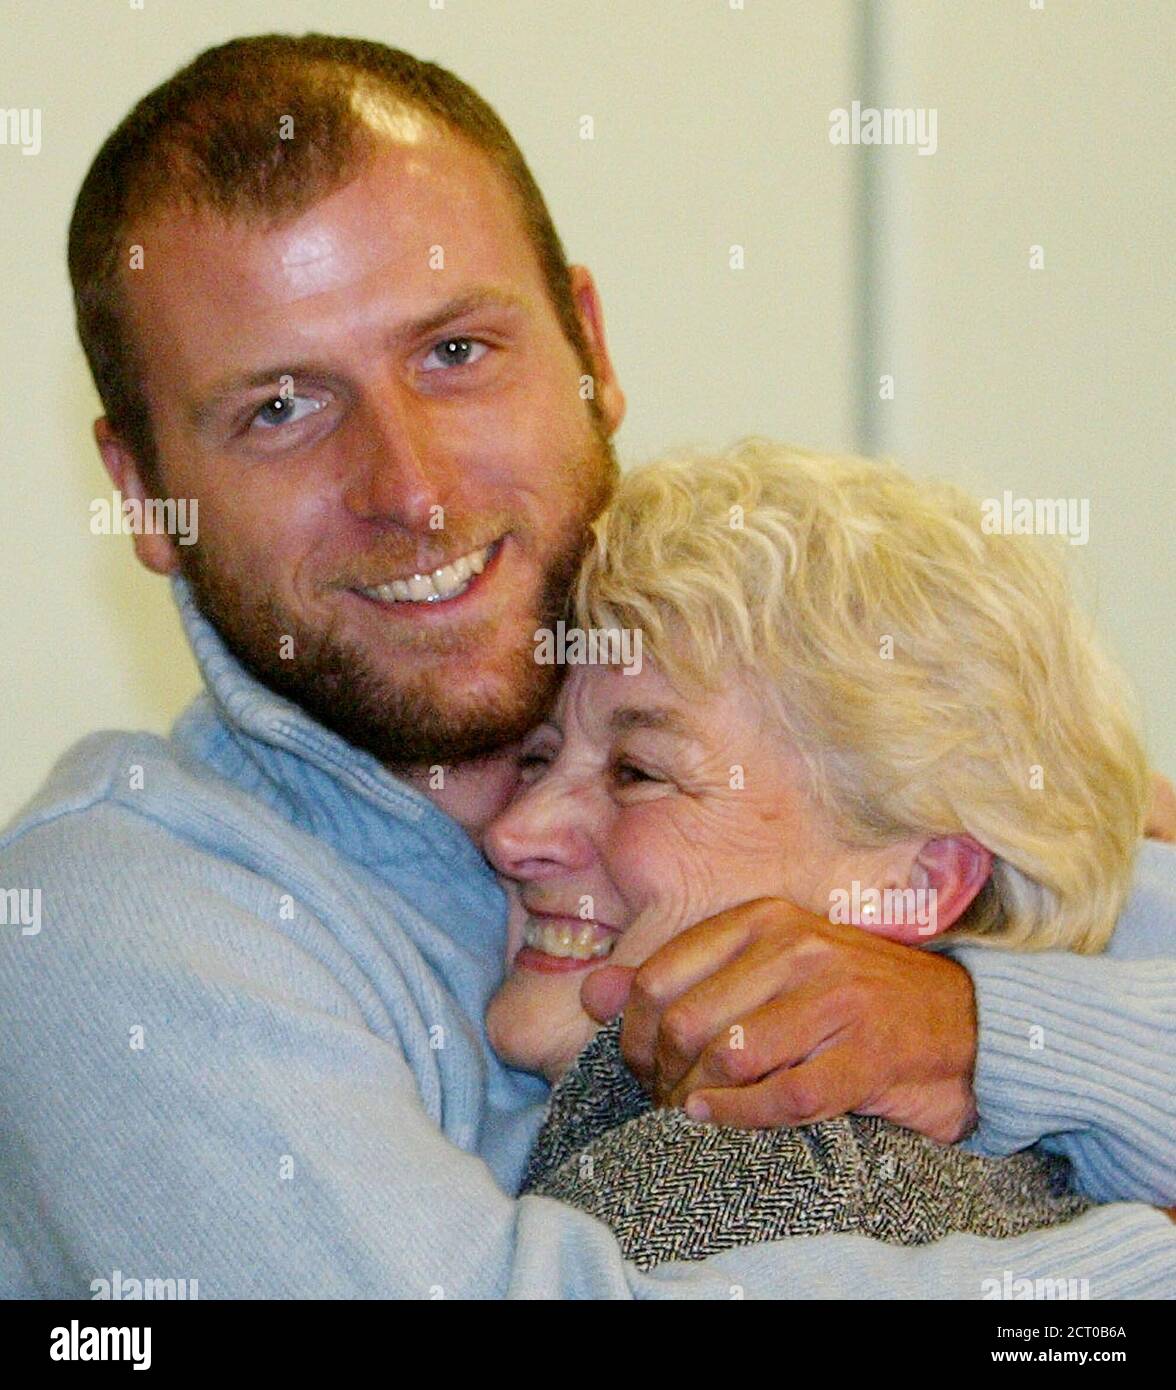 Britain's Mark Henderson (L) embraces his mother Sharelle during a news conference after his arrival at London's Heathrow airport, December 24, 2003. Henderson, who was held hostage for more than three months by Marxist rebels in Colombia, arrived back in England on Wednesday expressing huge relief and thanks to the people who negotiated his release. REUTERS/Toby Melville  TM/ASA/GM Stock Photo